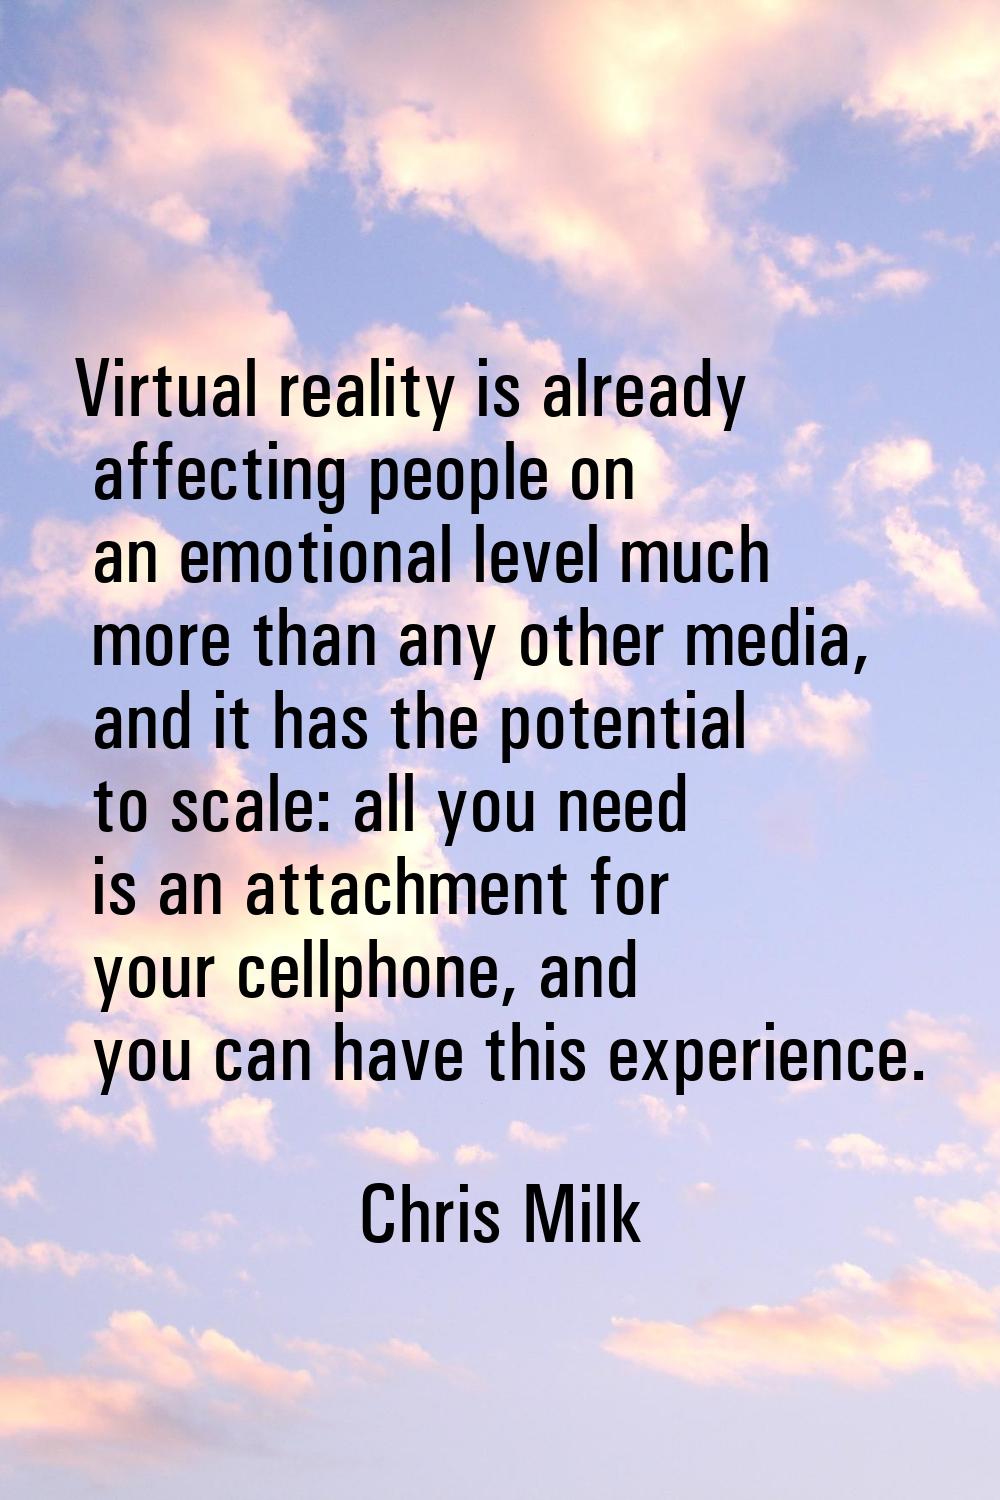 Virtual reality is already affecting people on an emotional level much more than any other media, a